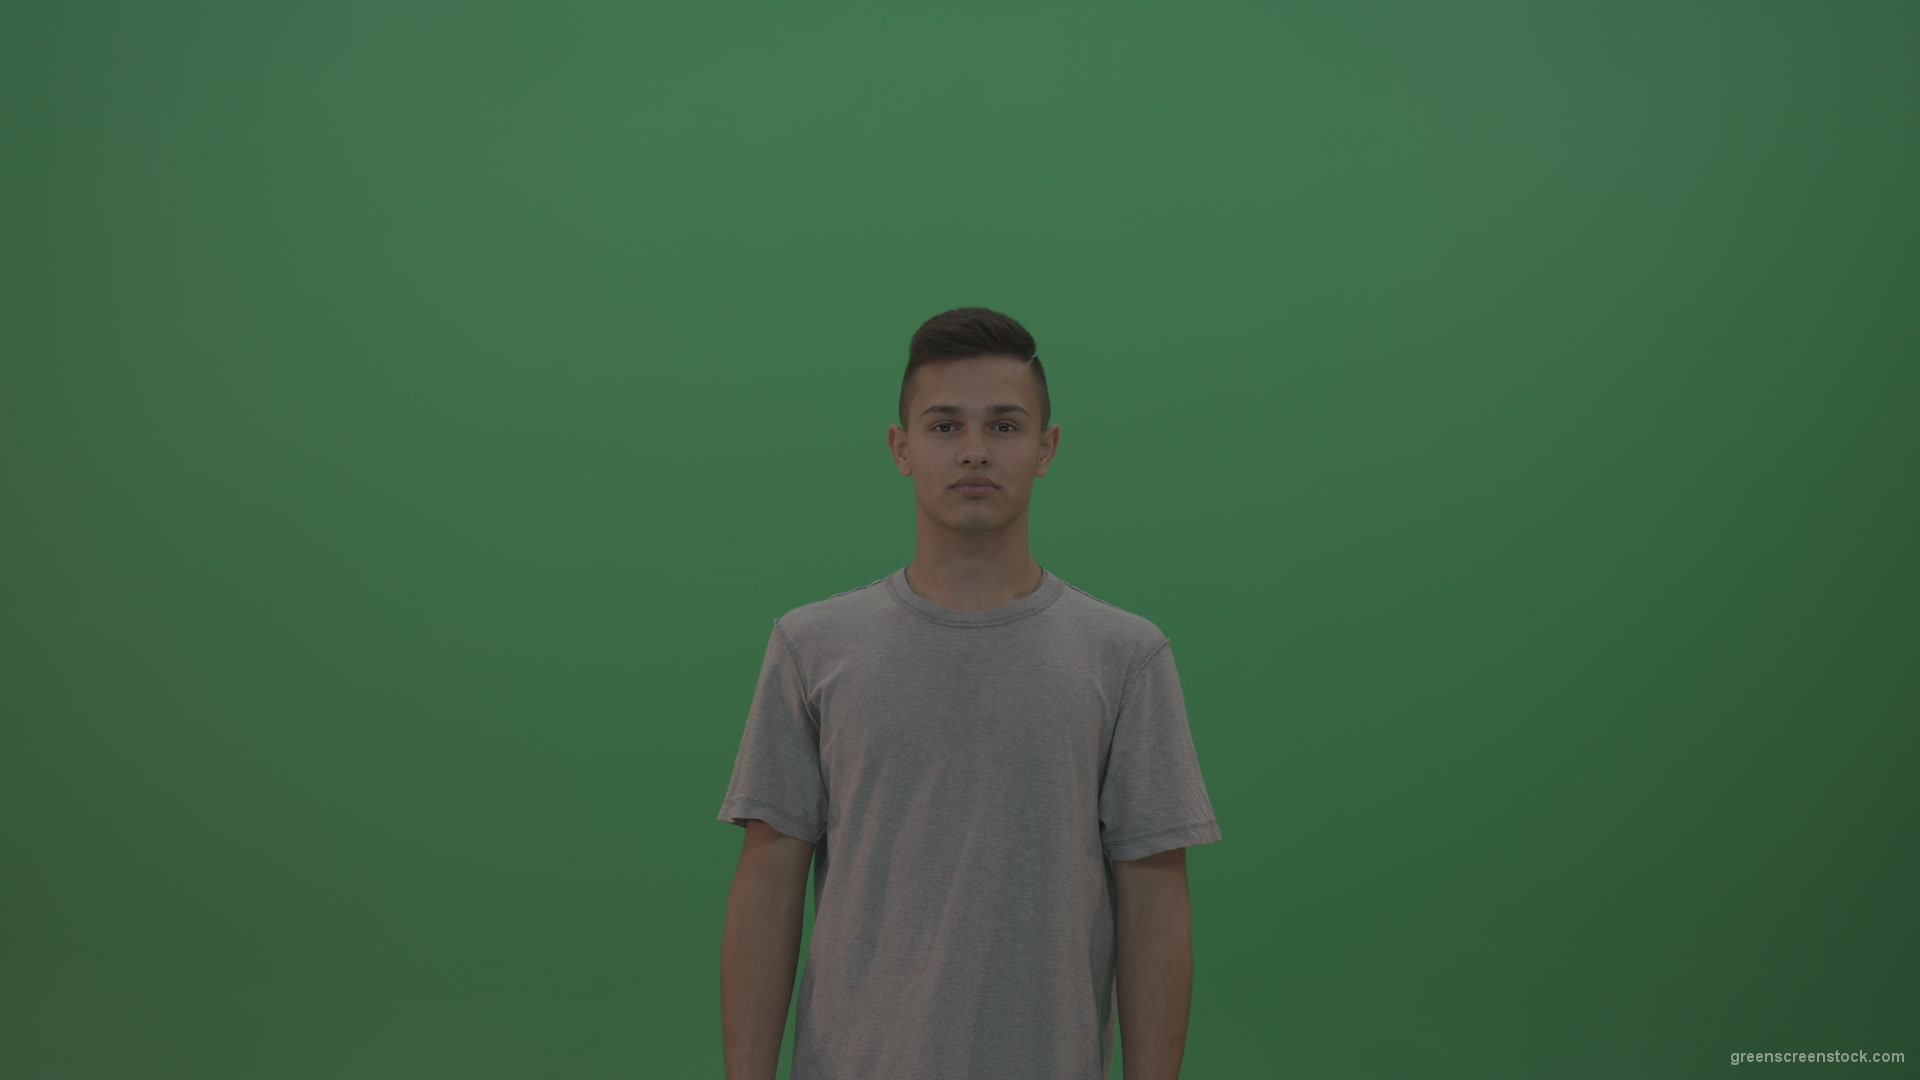 Boy-in-grey-wear-expresses-disappointment-over-green-screen-background_002 Green Screen Stock